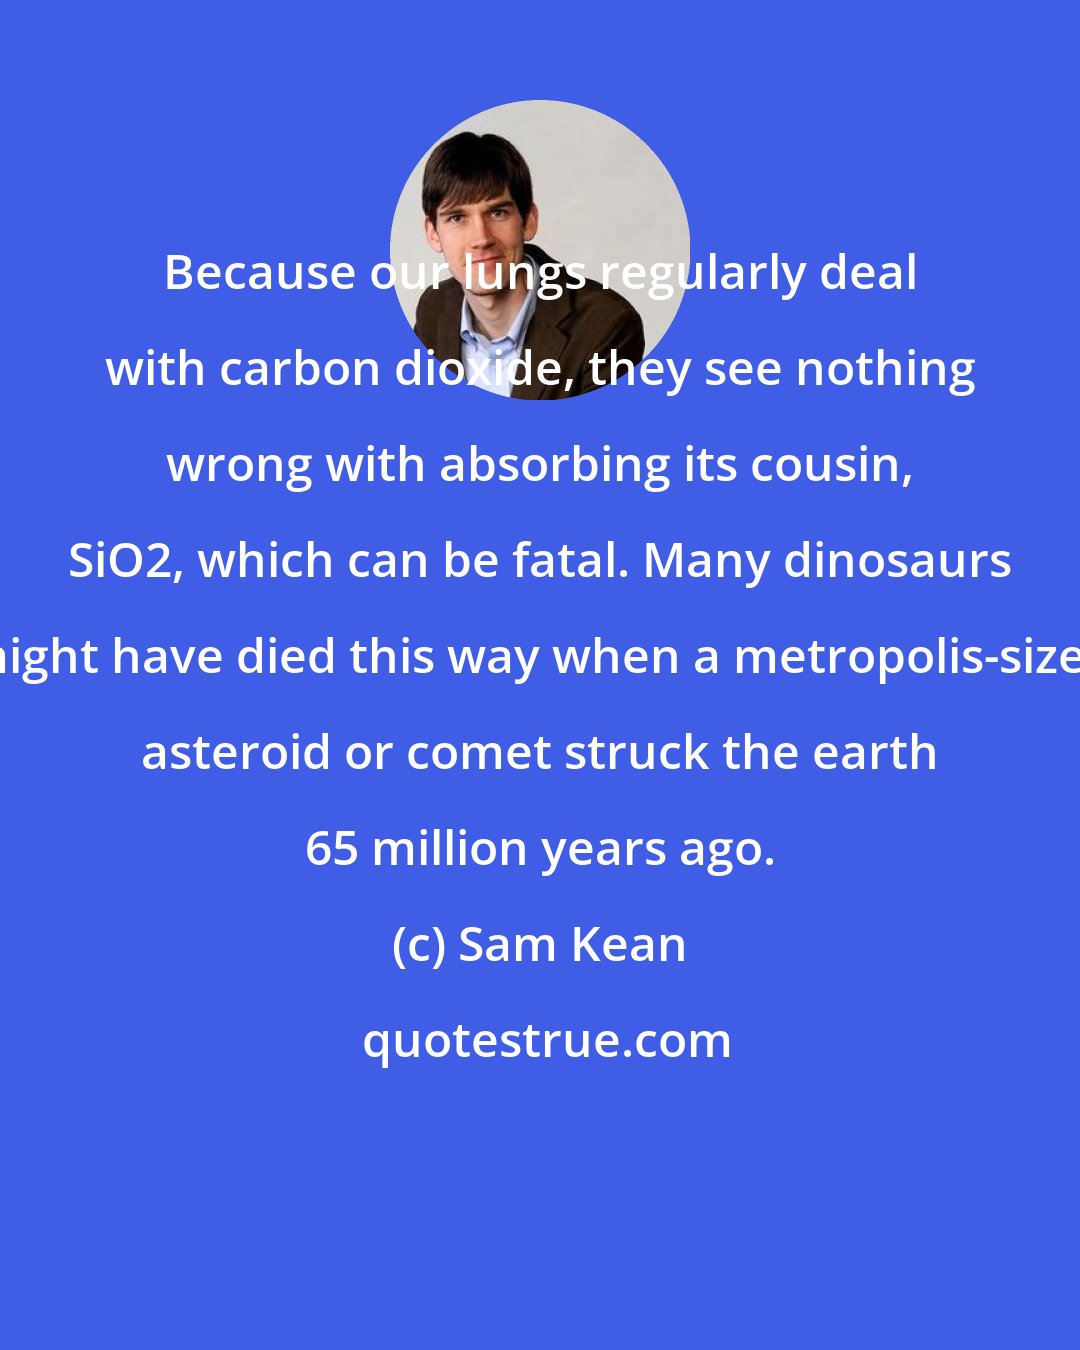 Sam Kean: Because our lungs regularly deal with carbon dioxide, they see nothing wrong with absorbing its cousin, SiO2, which can be fatal. Many dinosaurs might have died this way when a metropolis-sized asteroid or comet struck the earth 65 million years ago.